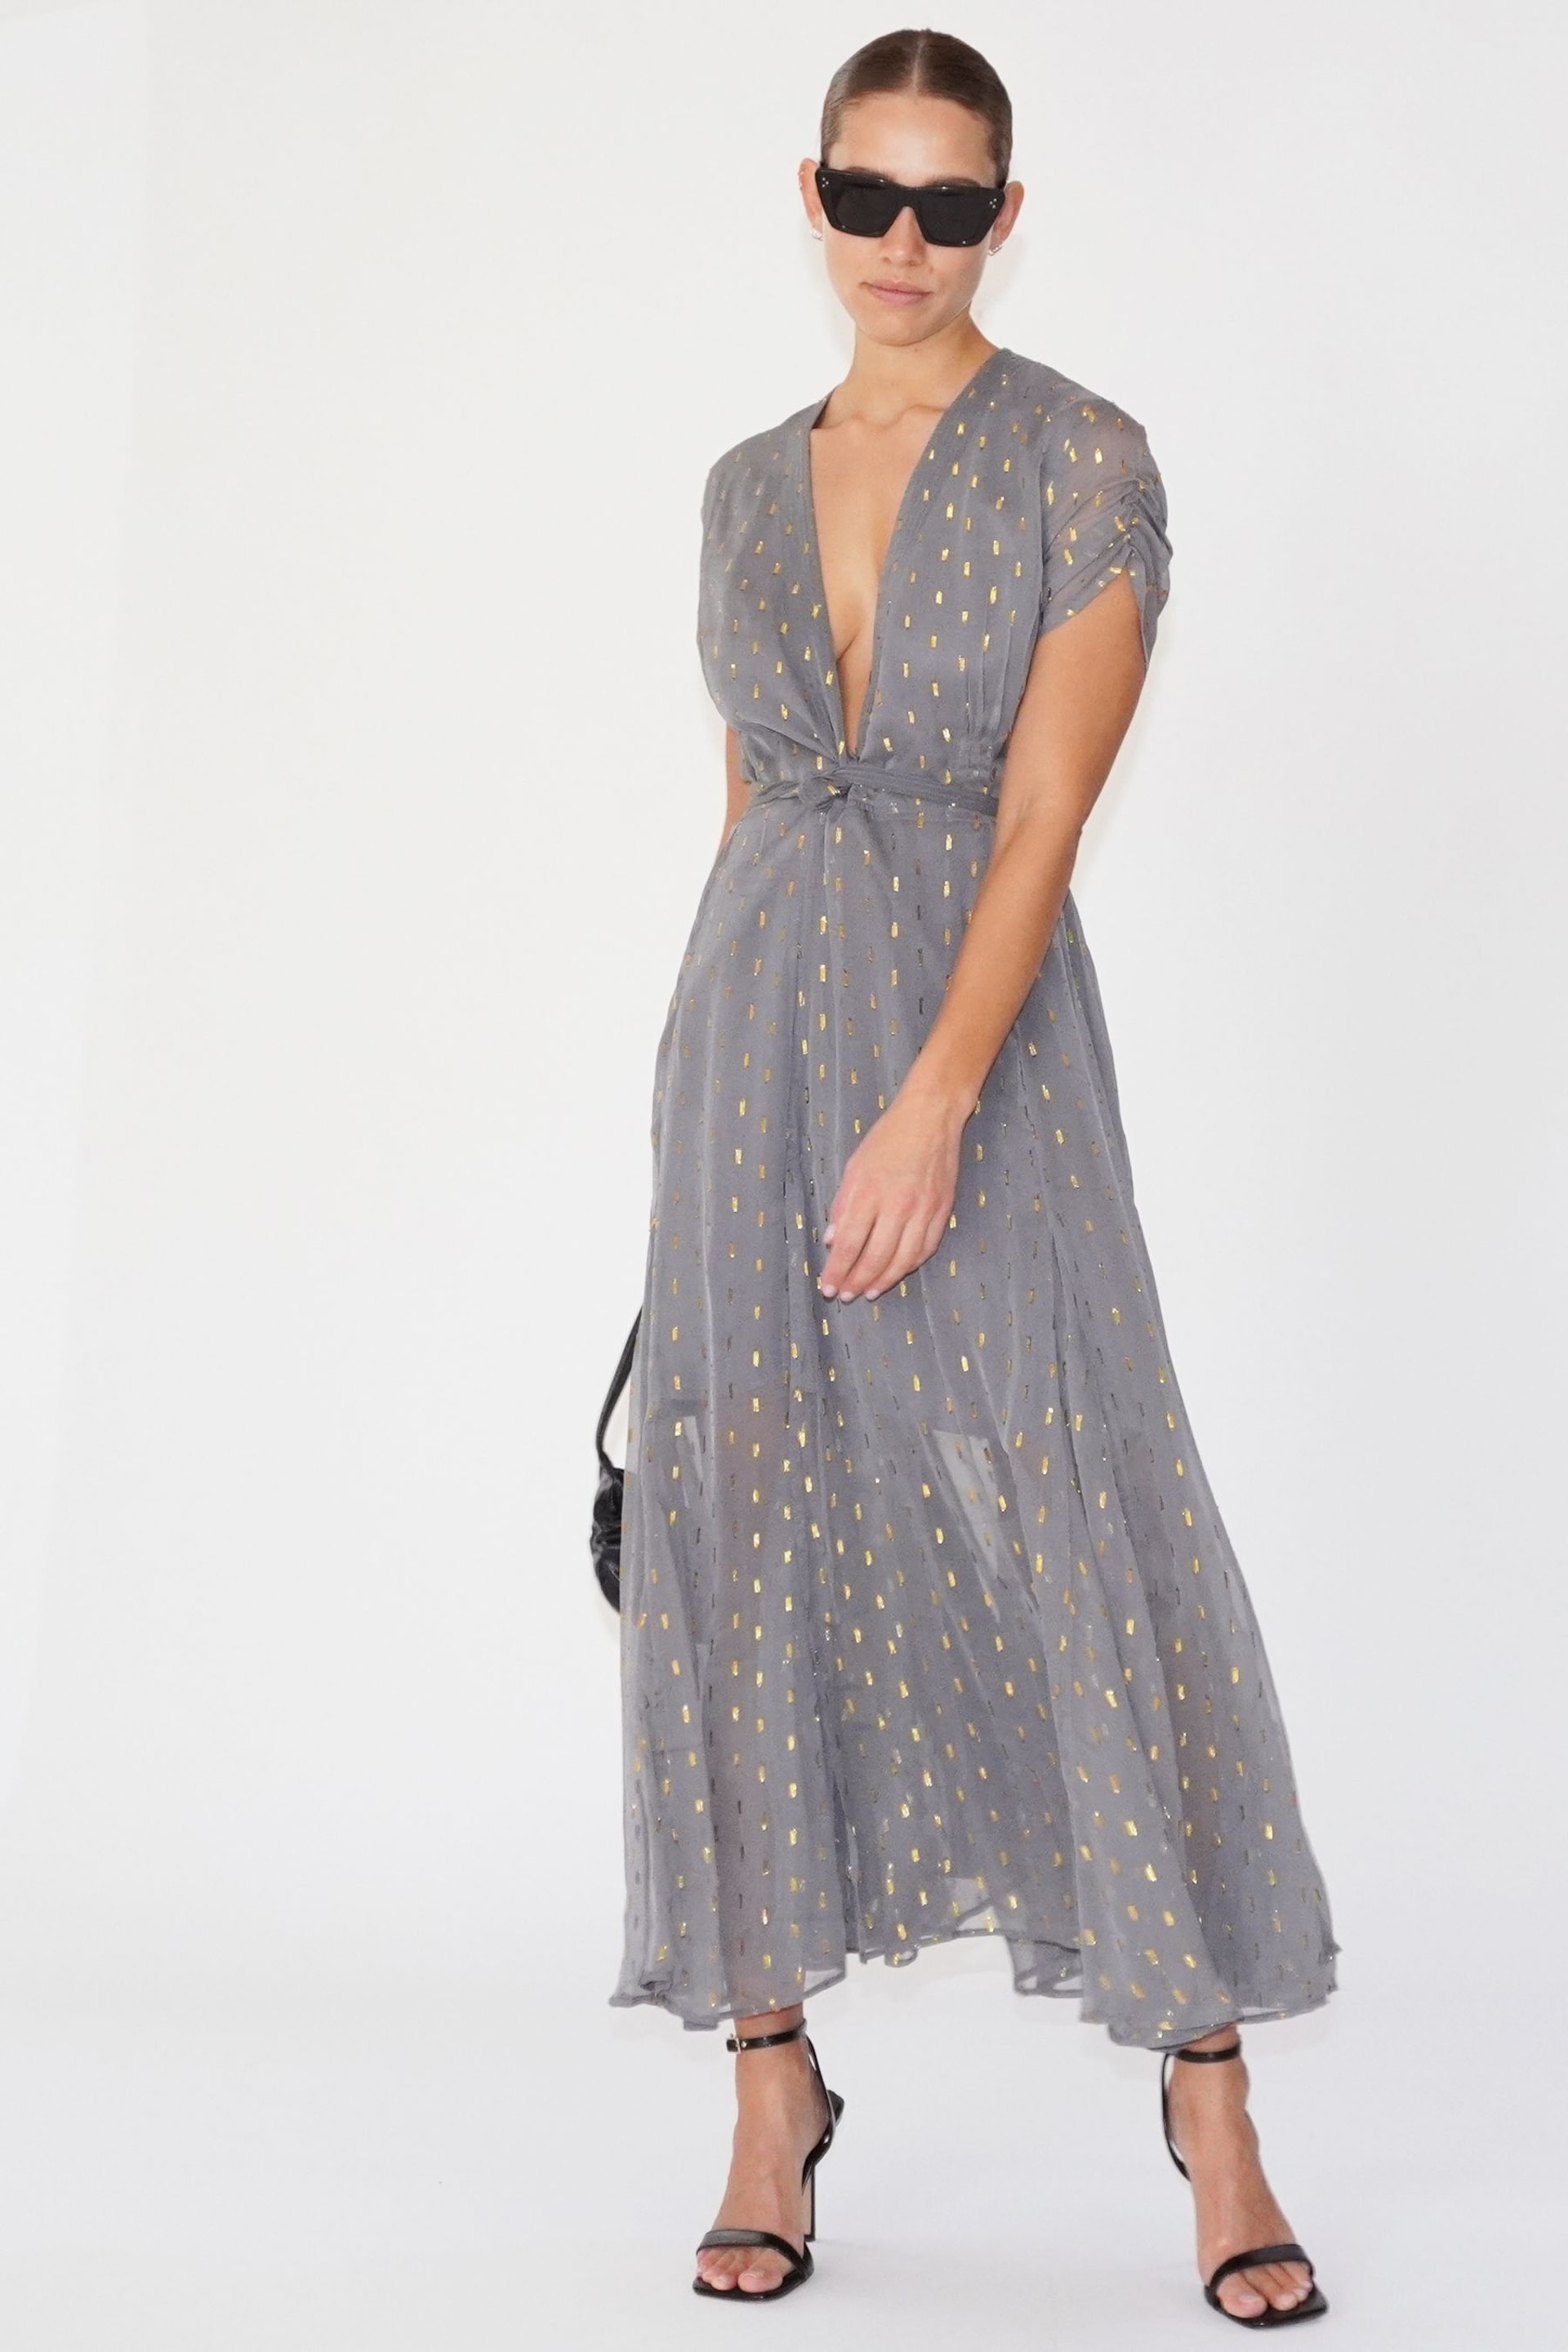 Religion Grey Wrap Maxi Dress With Full Skirt In Grey Dot On Grey - Image 1 of 6